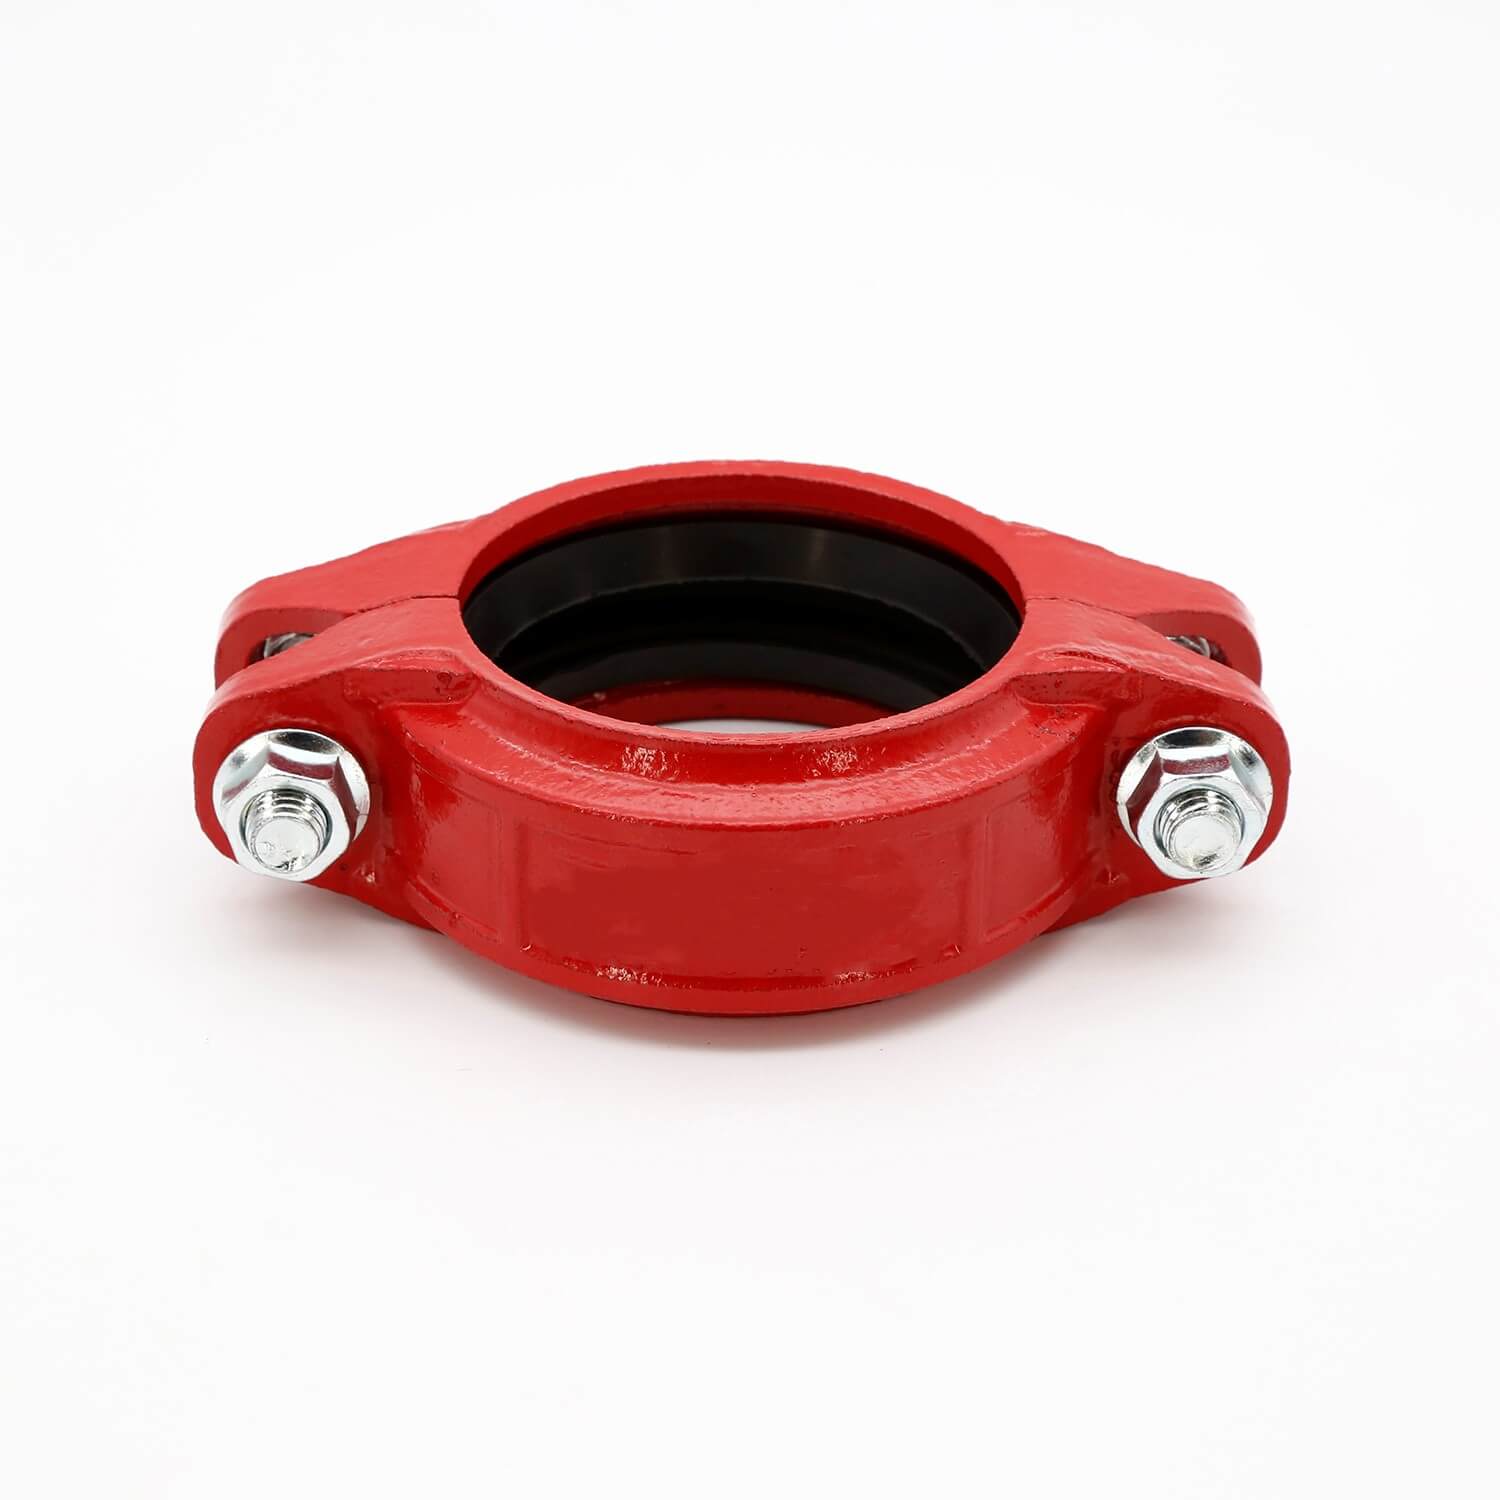 Groove Fitting Ductile Iron Rigid Pipe Coupling